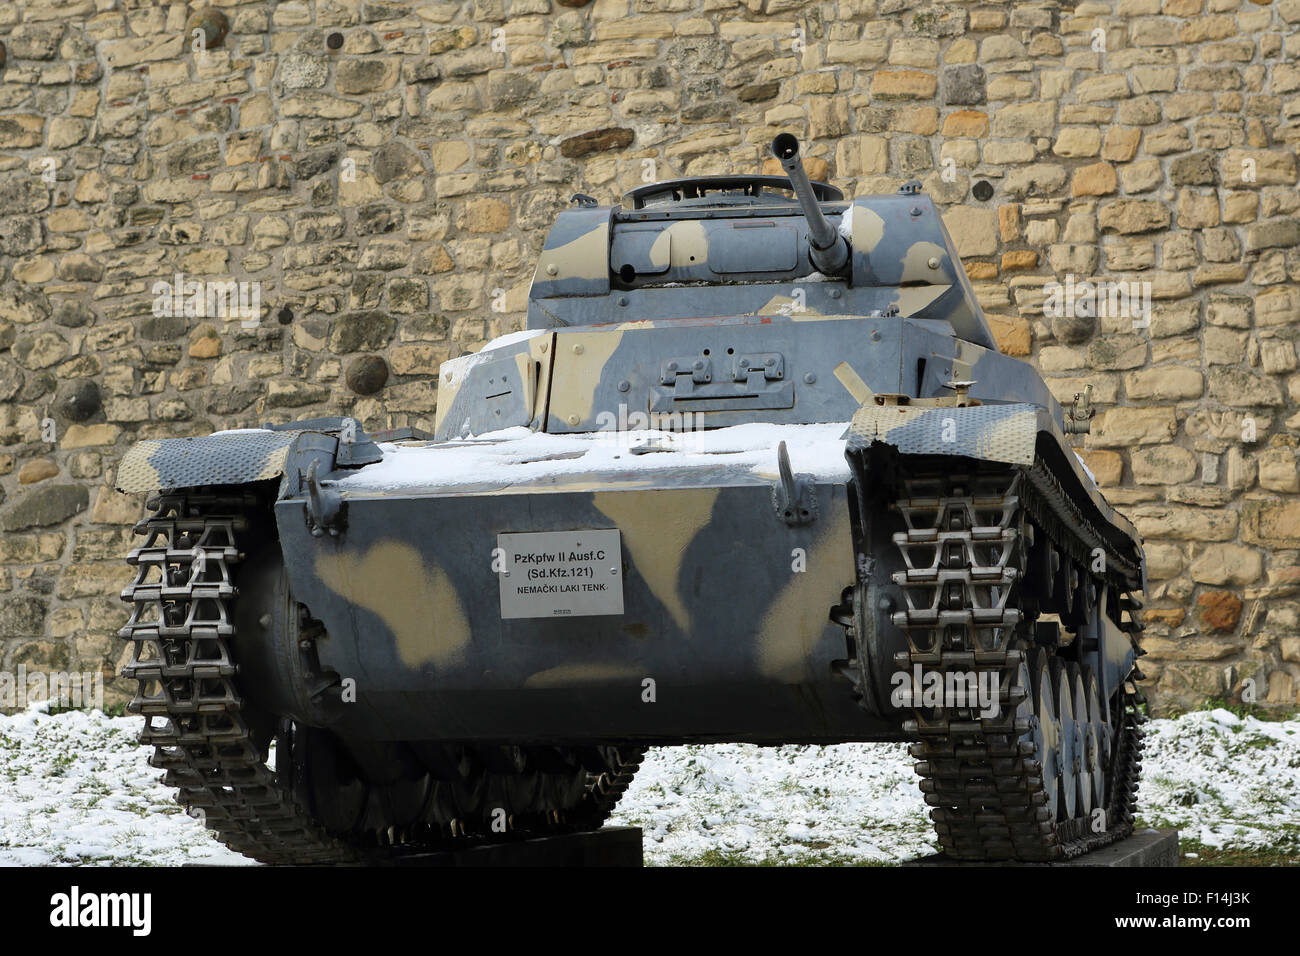 A German World War Two tank at Kalemegdan Fortress in Belgrade, Serbia. The castle holds Serbia's Military Museum. Stock Photo